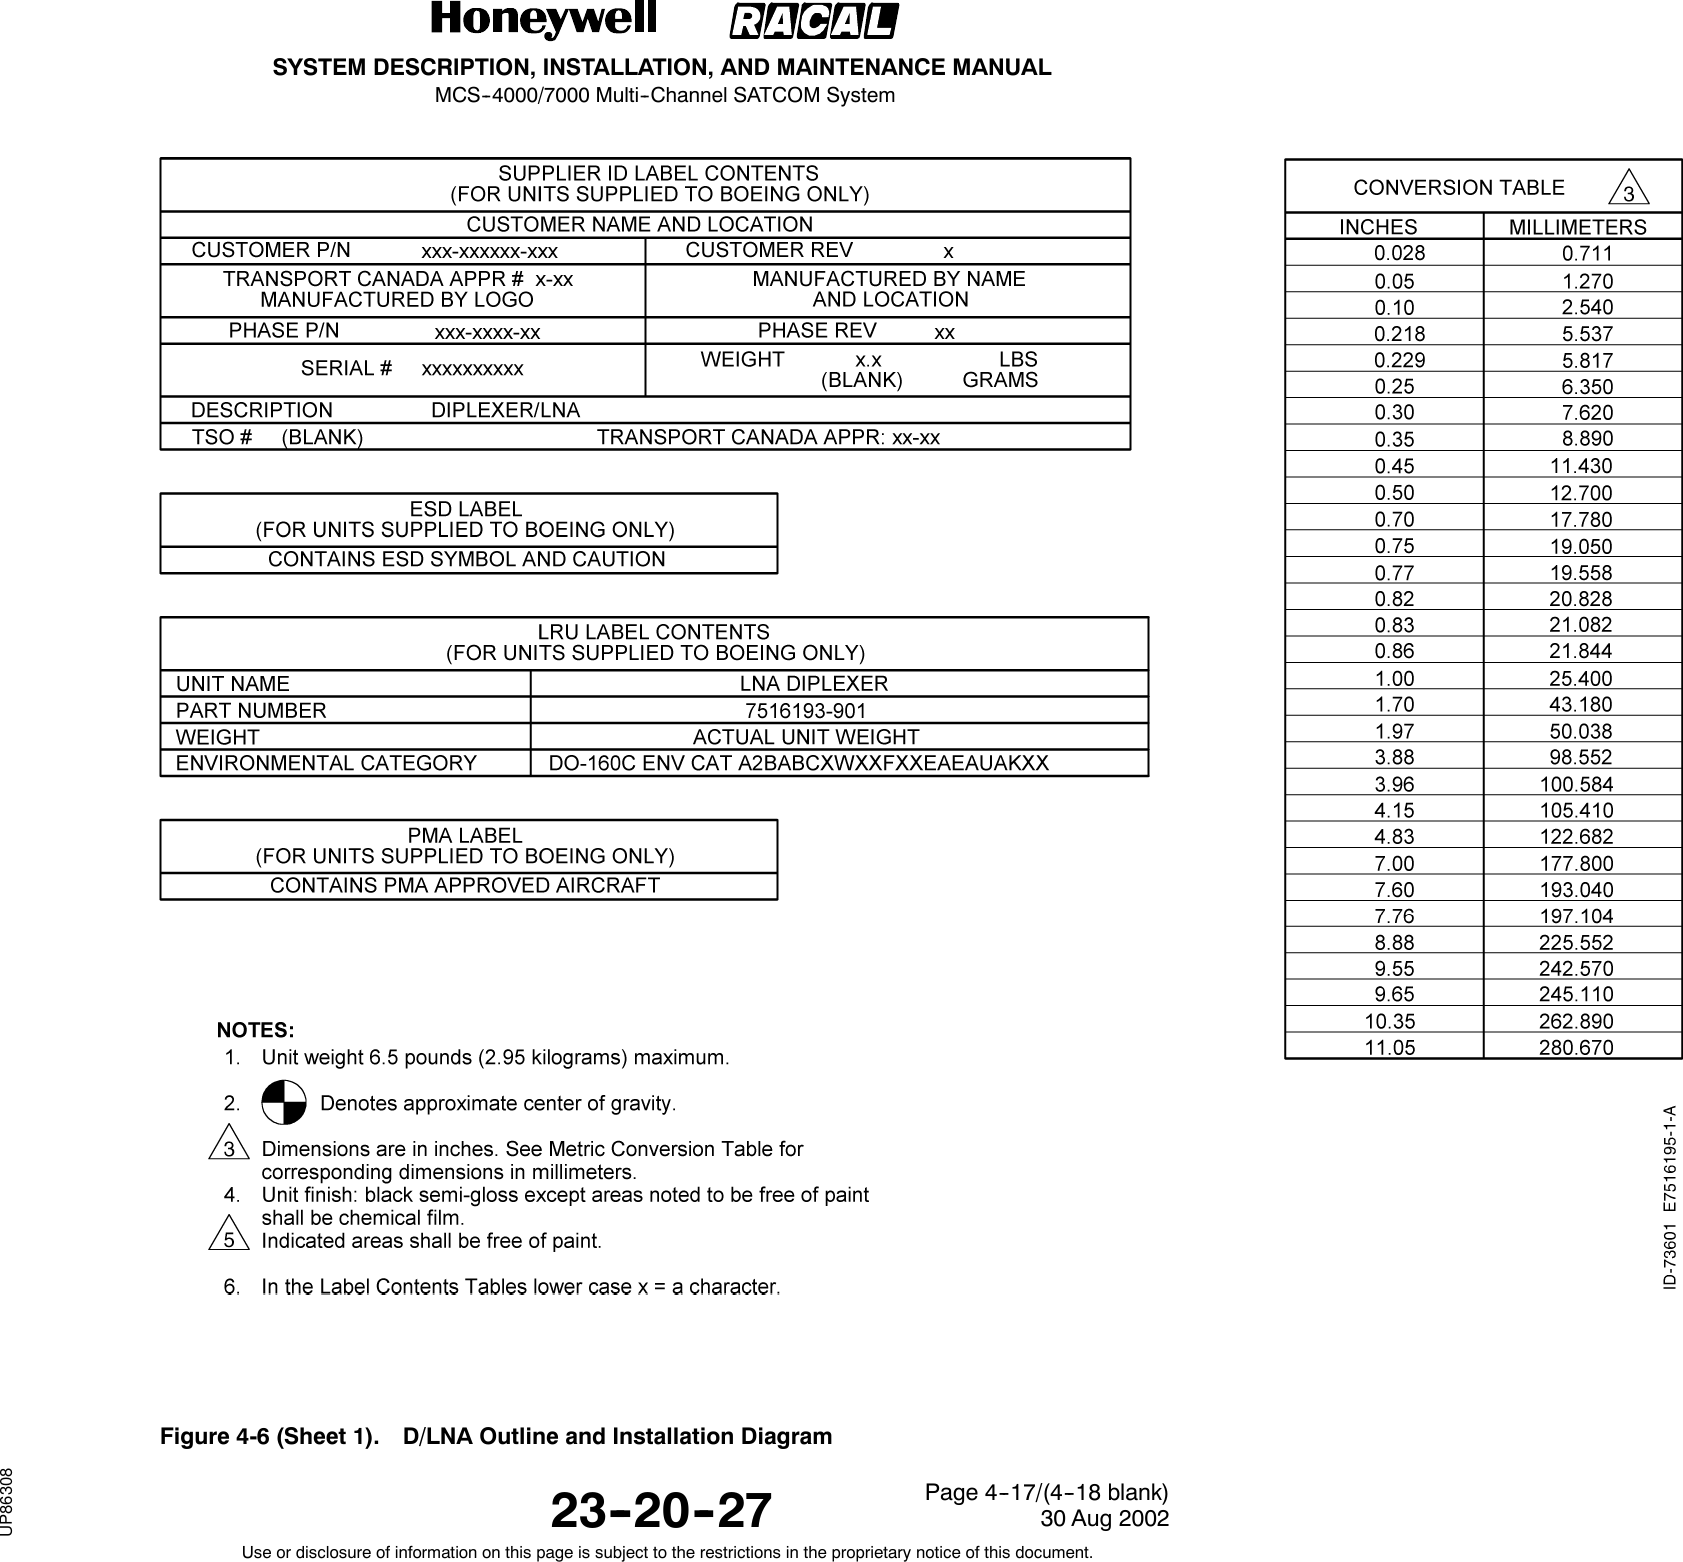 SYSTEM DESCRIPTION, INSTALLATION, AND MAINTENANCE MANUALMCS--4000/7000 Multi--Channel SATCOM System23--20--2730 Aug 2002Use or disclosure of information on this page is subject to the restrictions in the proprietary notice of this document.Page 4--17/(4--18 blank)Figure 4-6 (Sheet 1). D/LNA Outline and Installation DiagramRELEASED FOR THE EXCLUSIVE USE BY: HONEYWELL INTERNATIONALUP86308